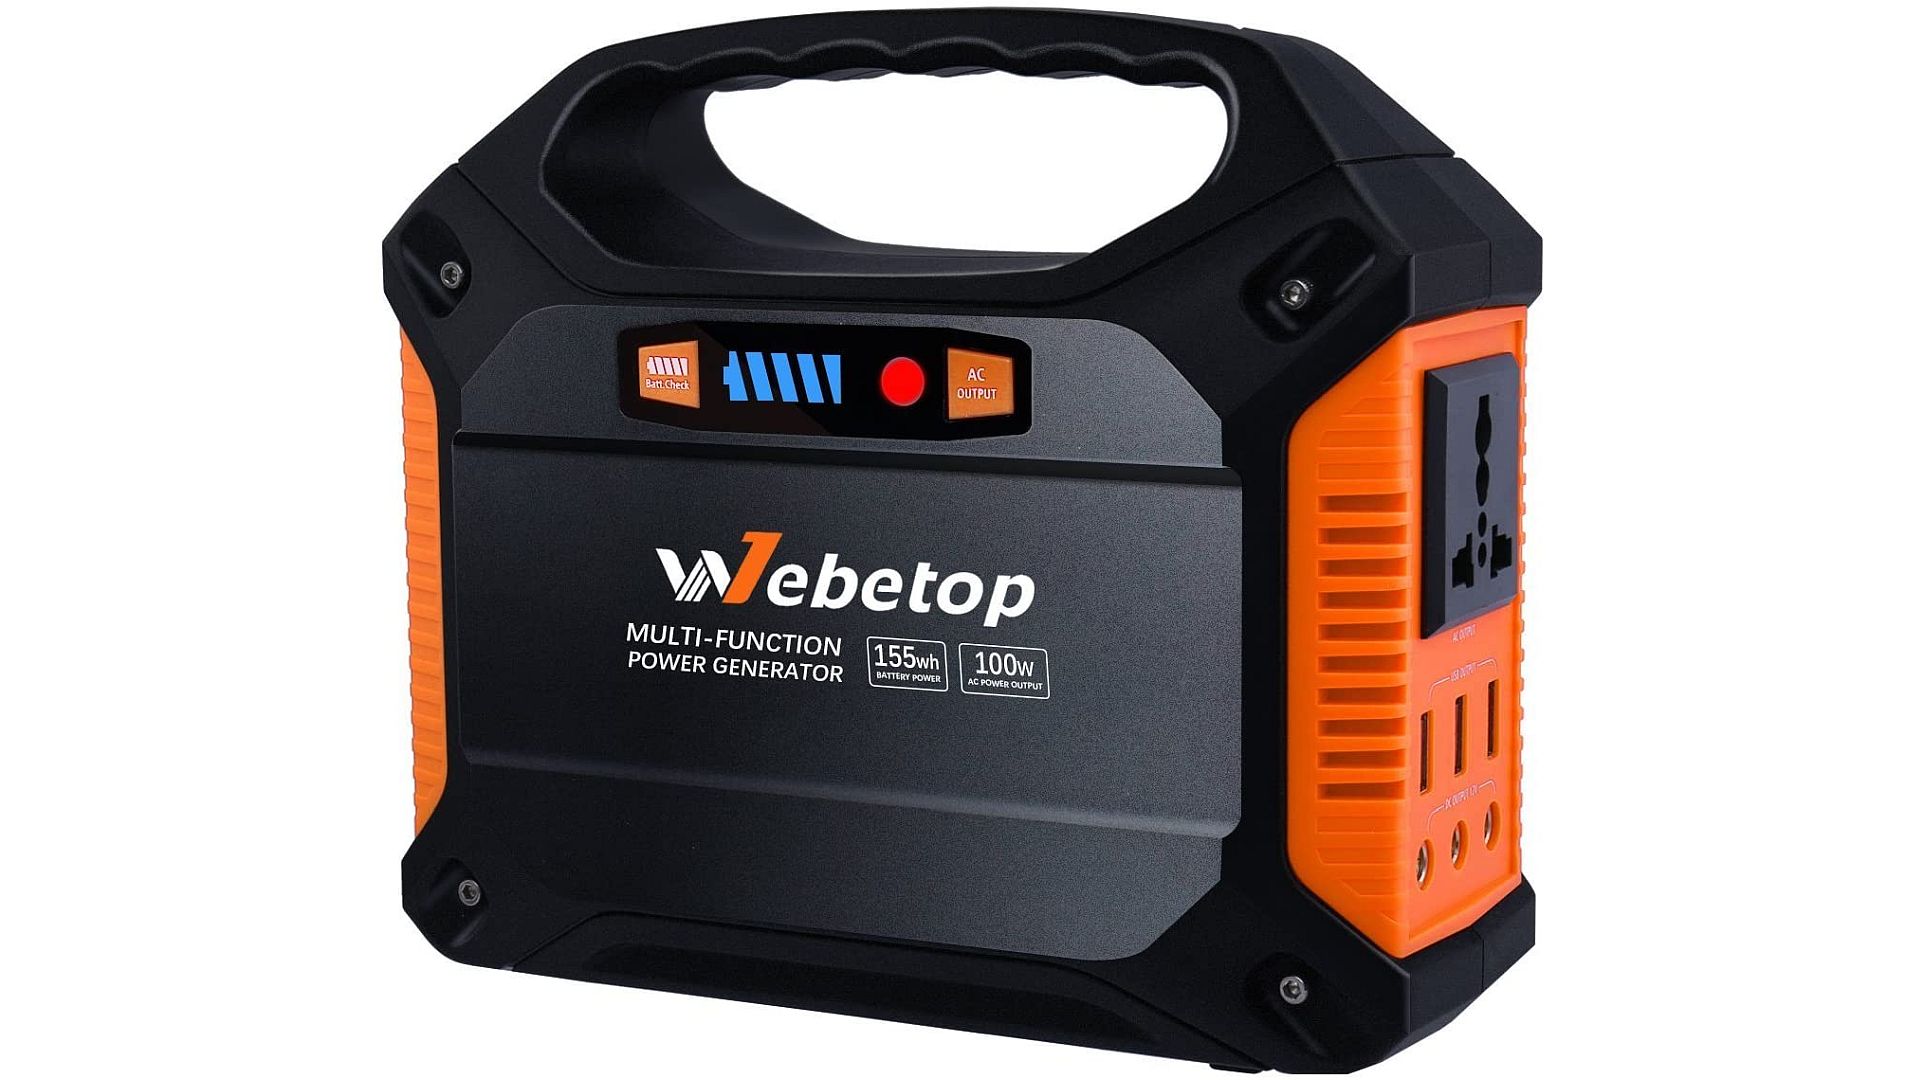 Webetop 155Wh Portable Power Source: Small But Useful